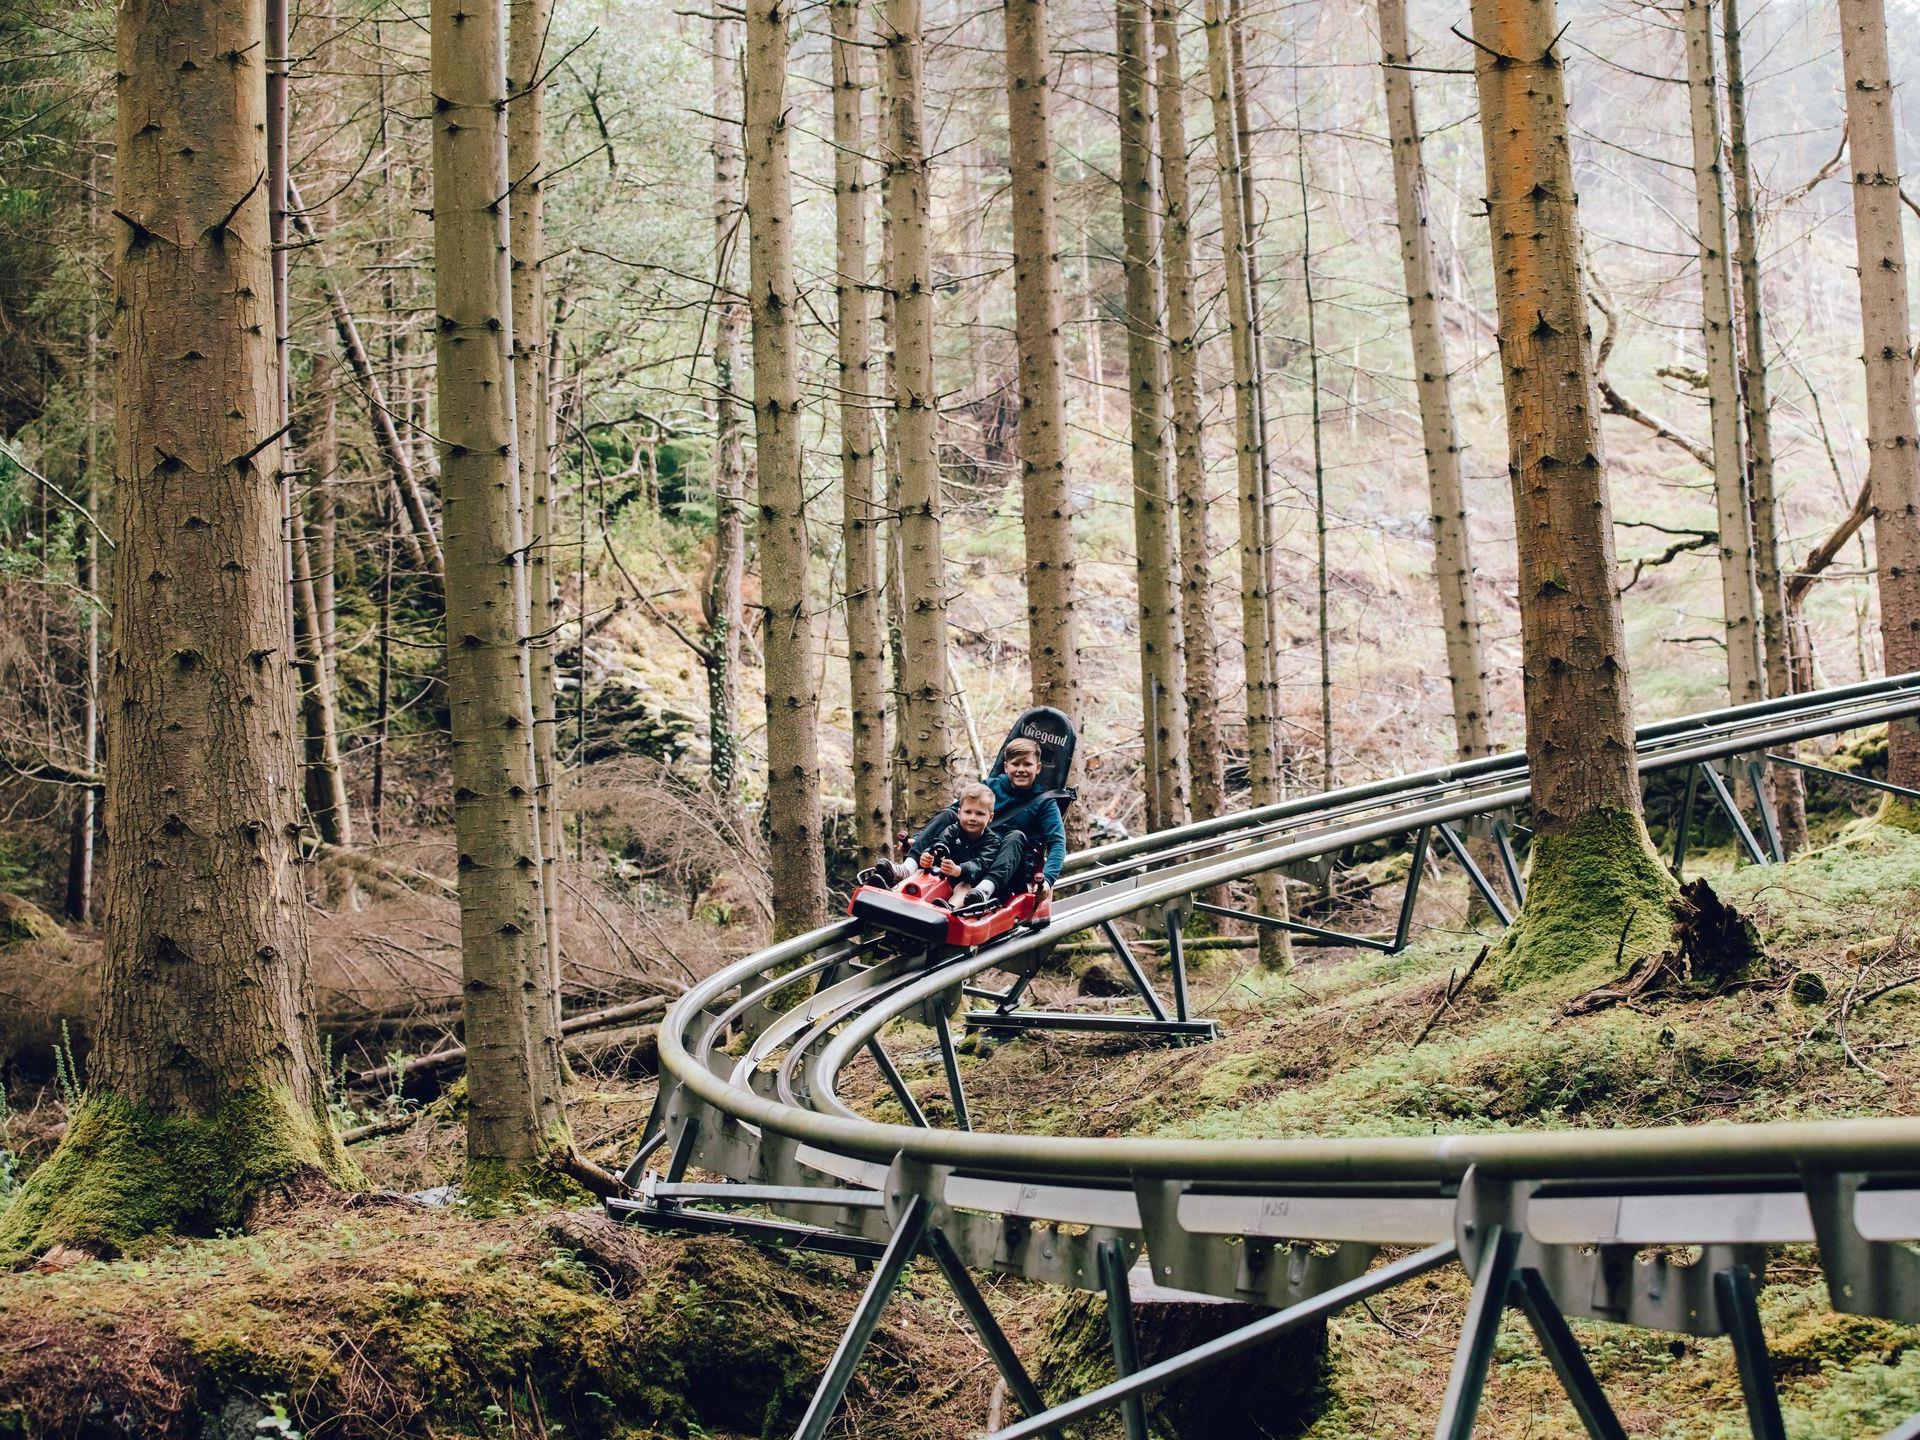 Europe's only alpine coaster of its kind